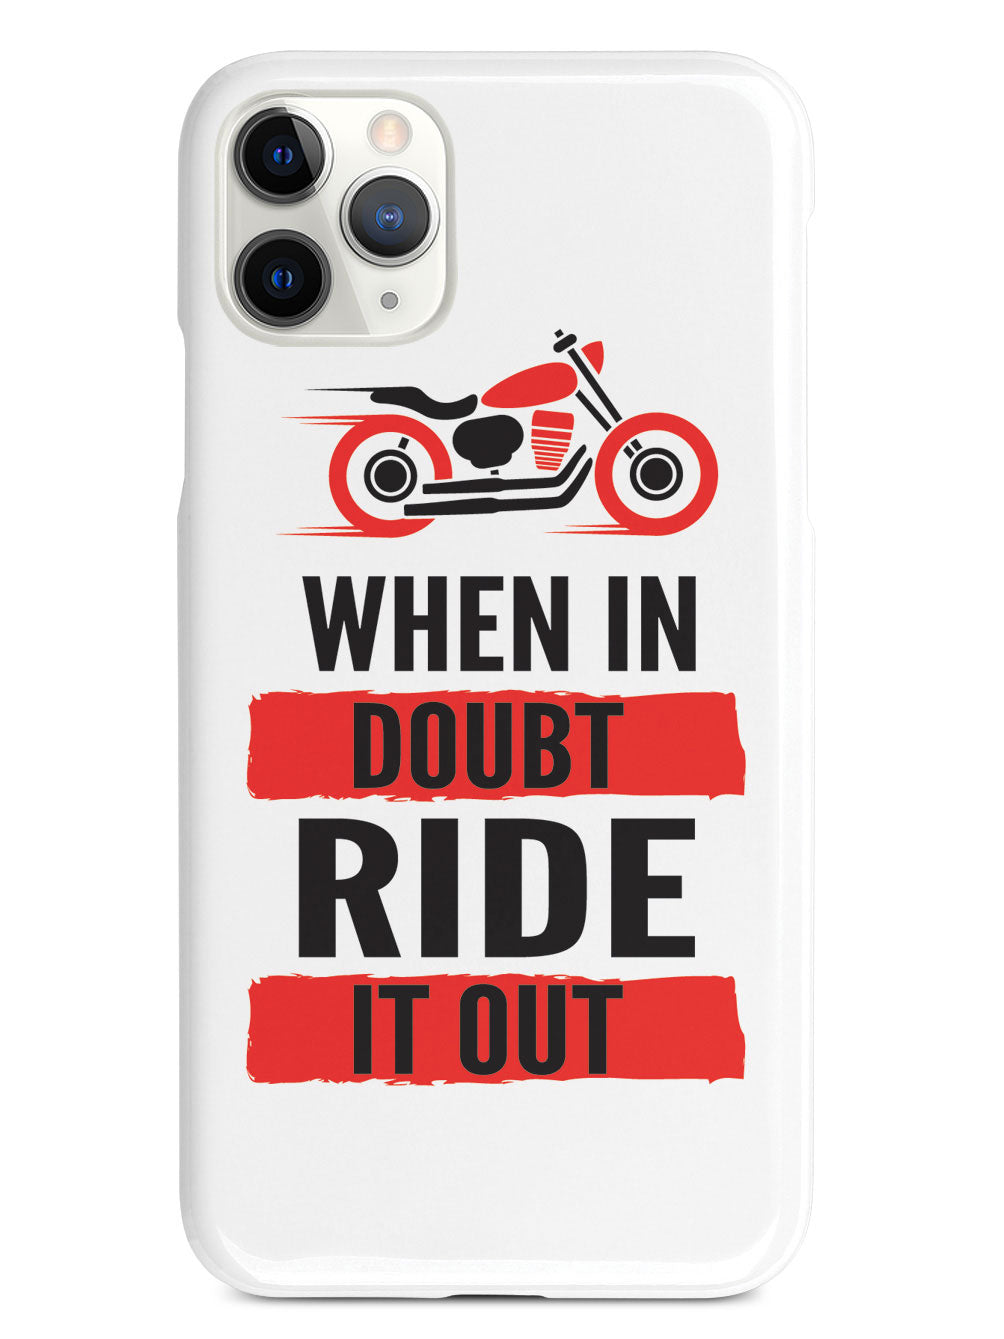 When in Doubt, Ride it Out - White Case